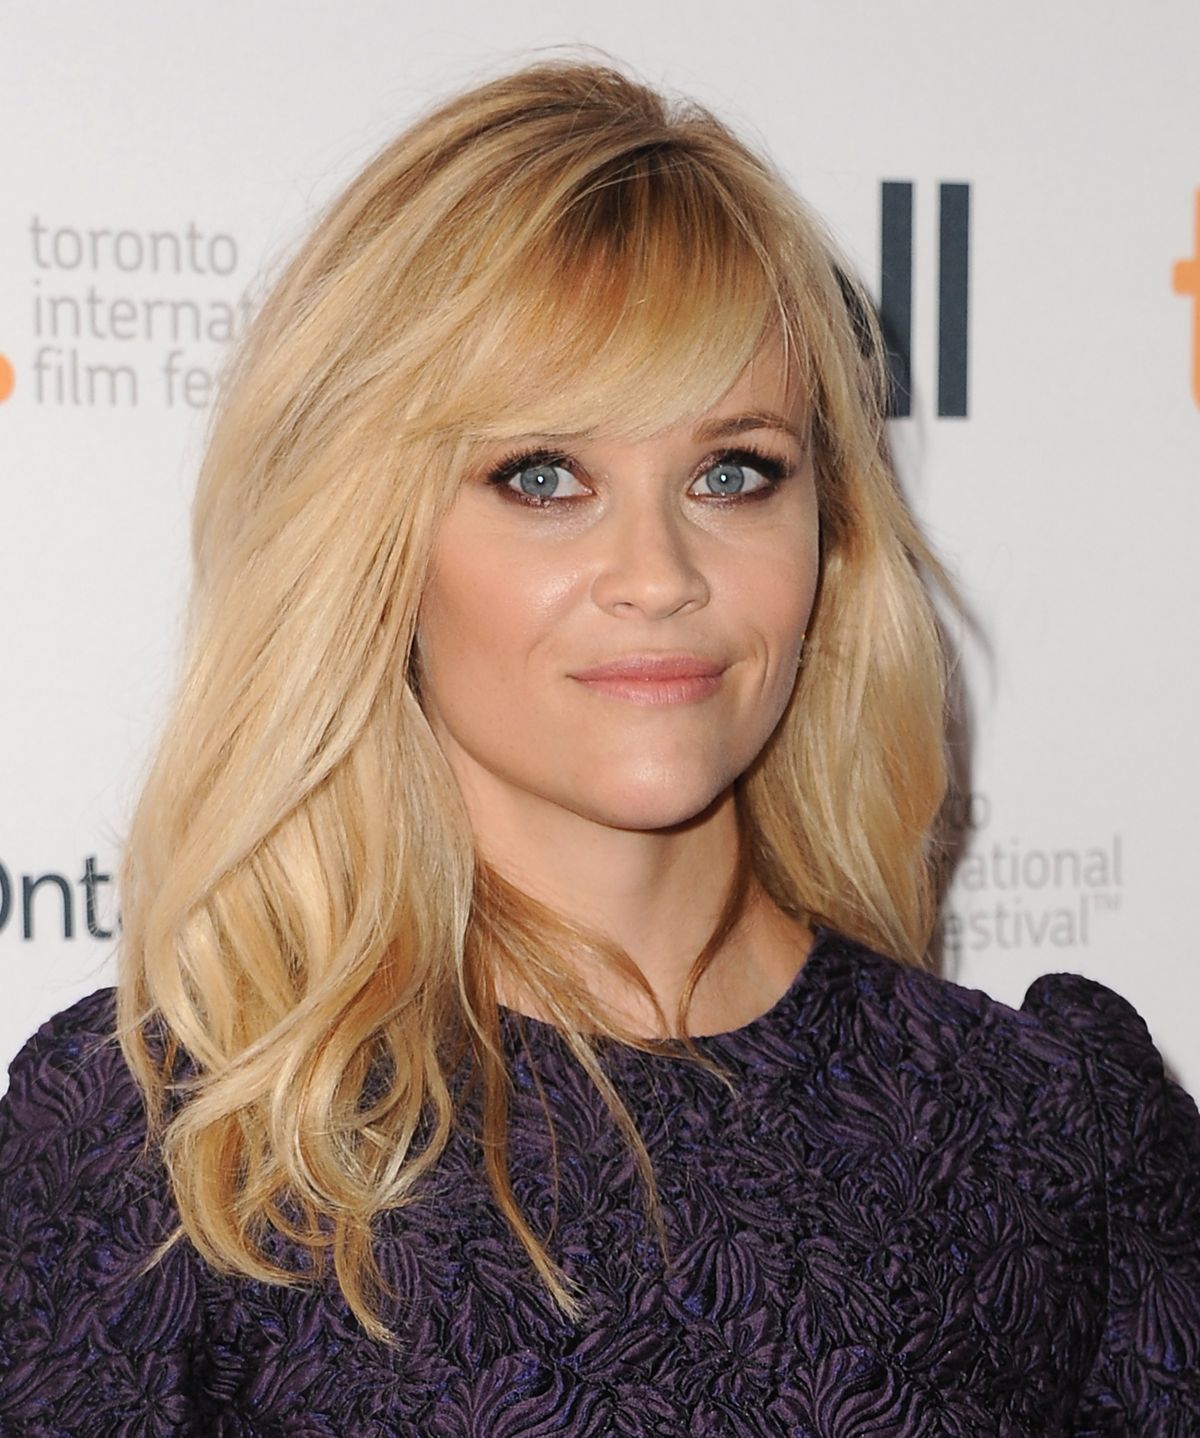 REESE WITHERSPOON at The Good Lie Premiere in Toronto – HawtCelebs